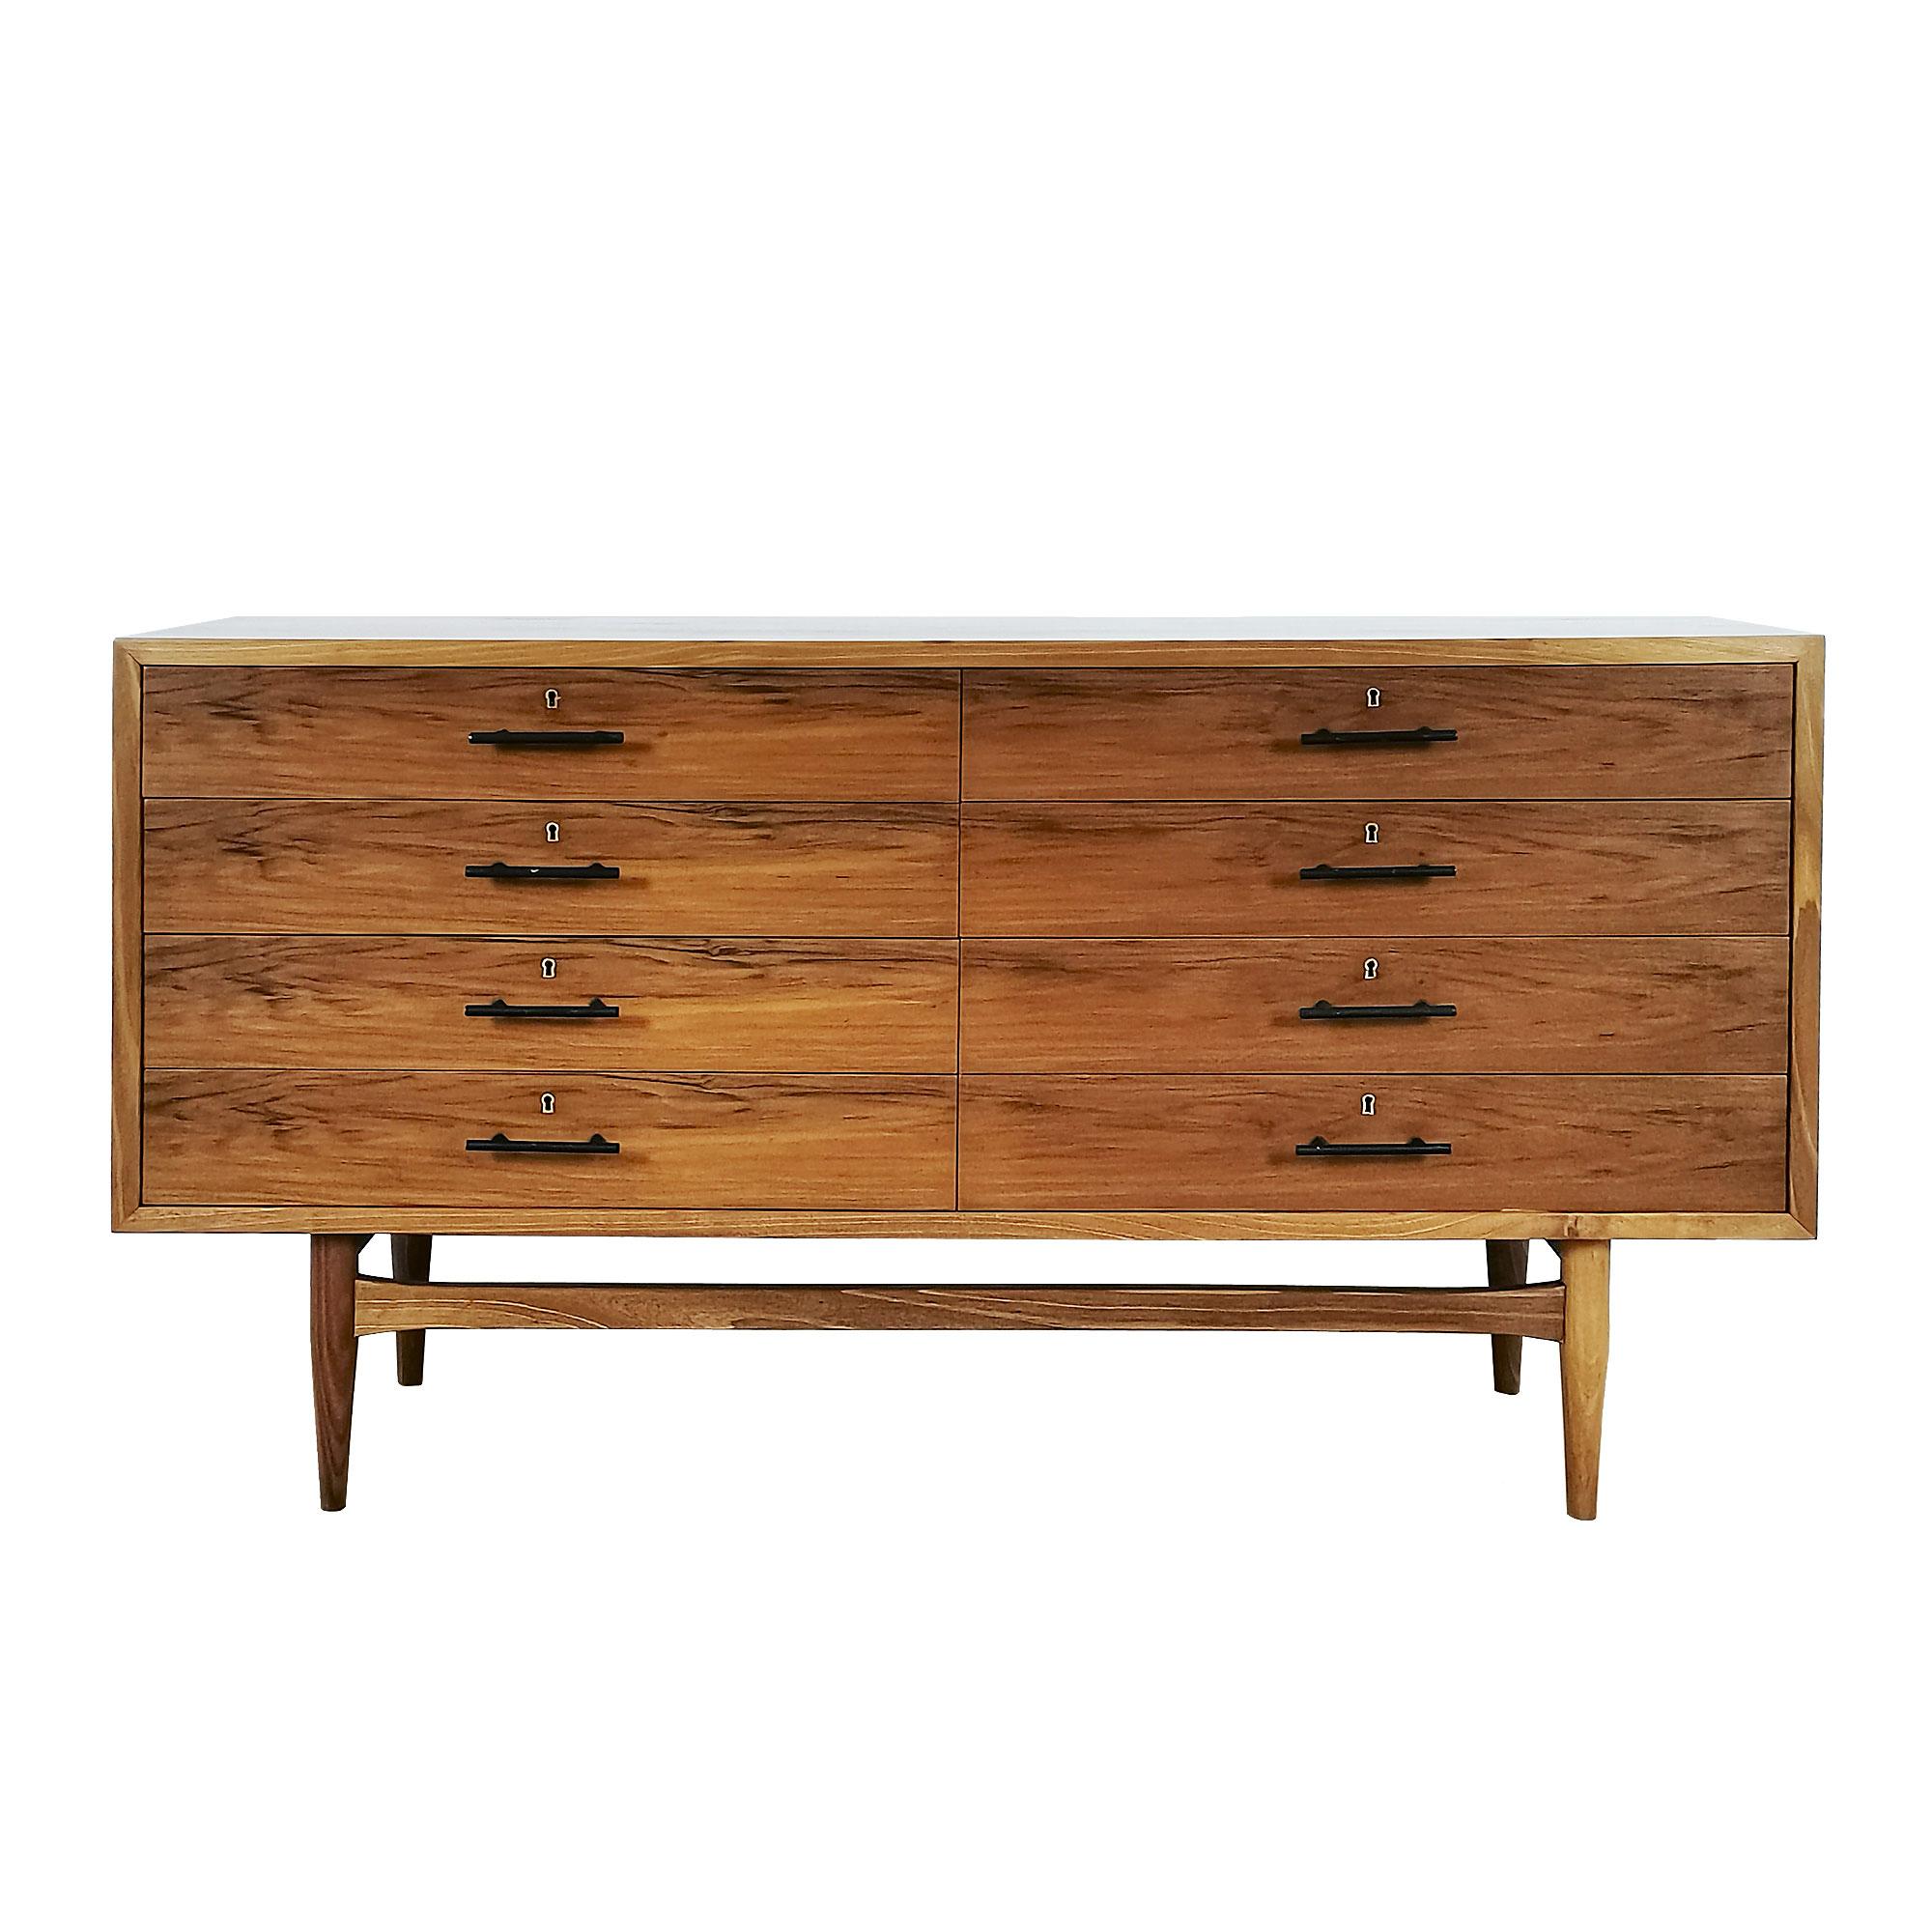 Cubist chest with eight drawers, solid walnut with walnut veneer and solid walnut base, wax finishing. Blackened steel handles.
Design: Jordi Vilanova.

Spain, Barcelona end of the 60´s.